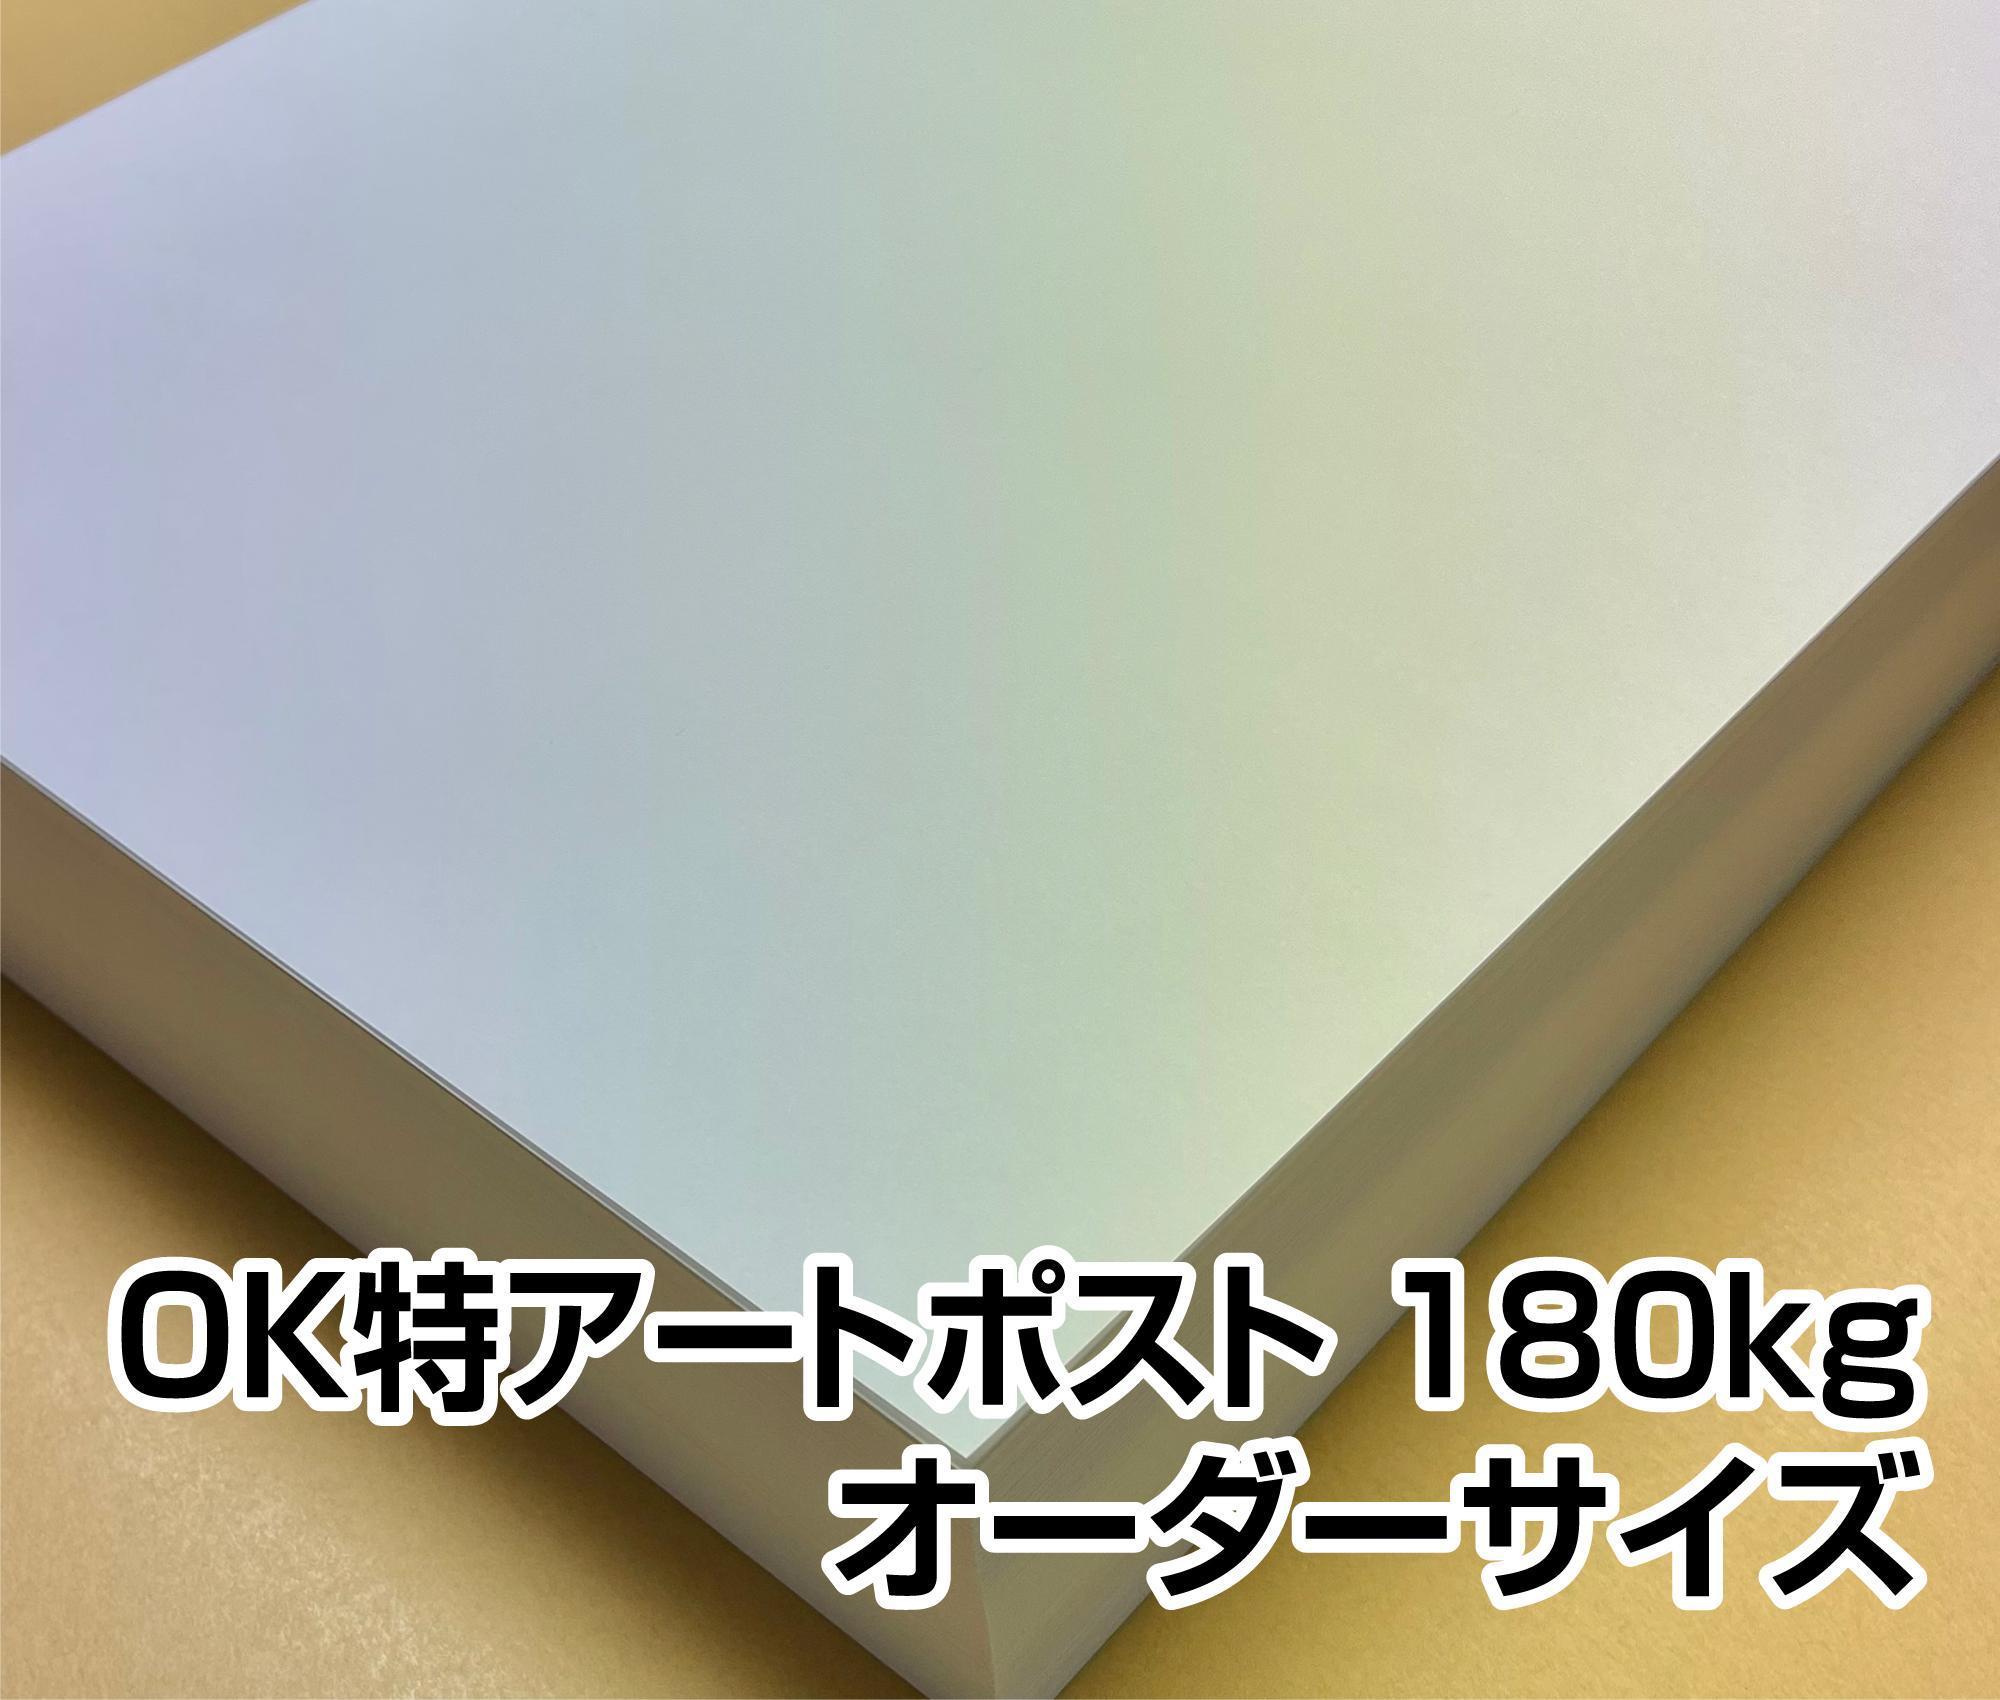 OK特アートポスト 180kg 209.4ｇ オーダーカット